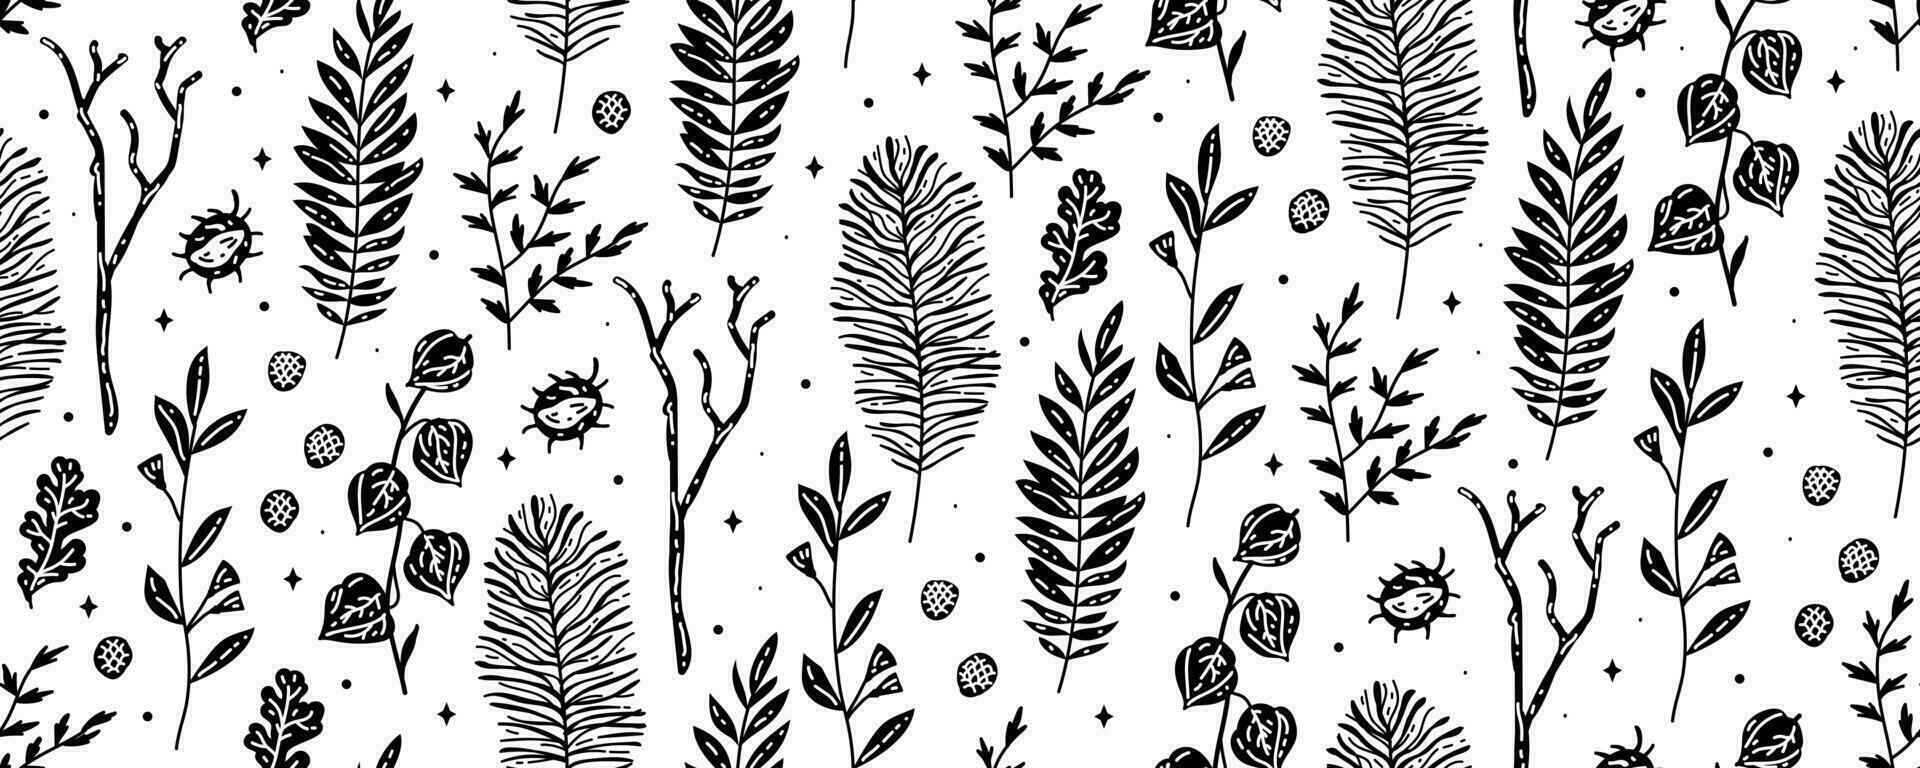 Monochrome seamless pattern with autumn leaves. vector